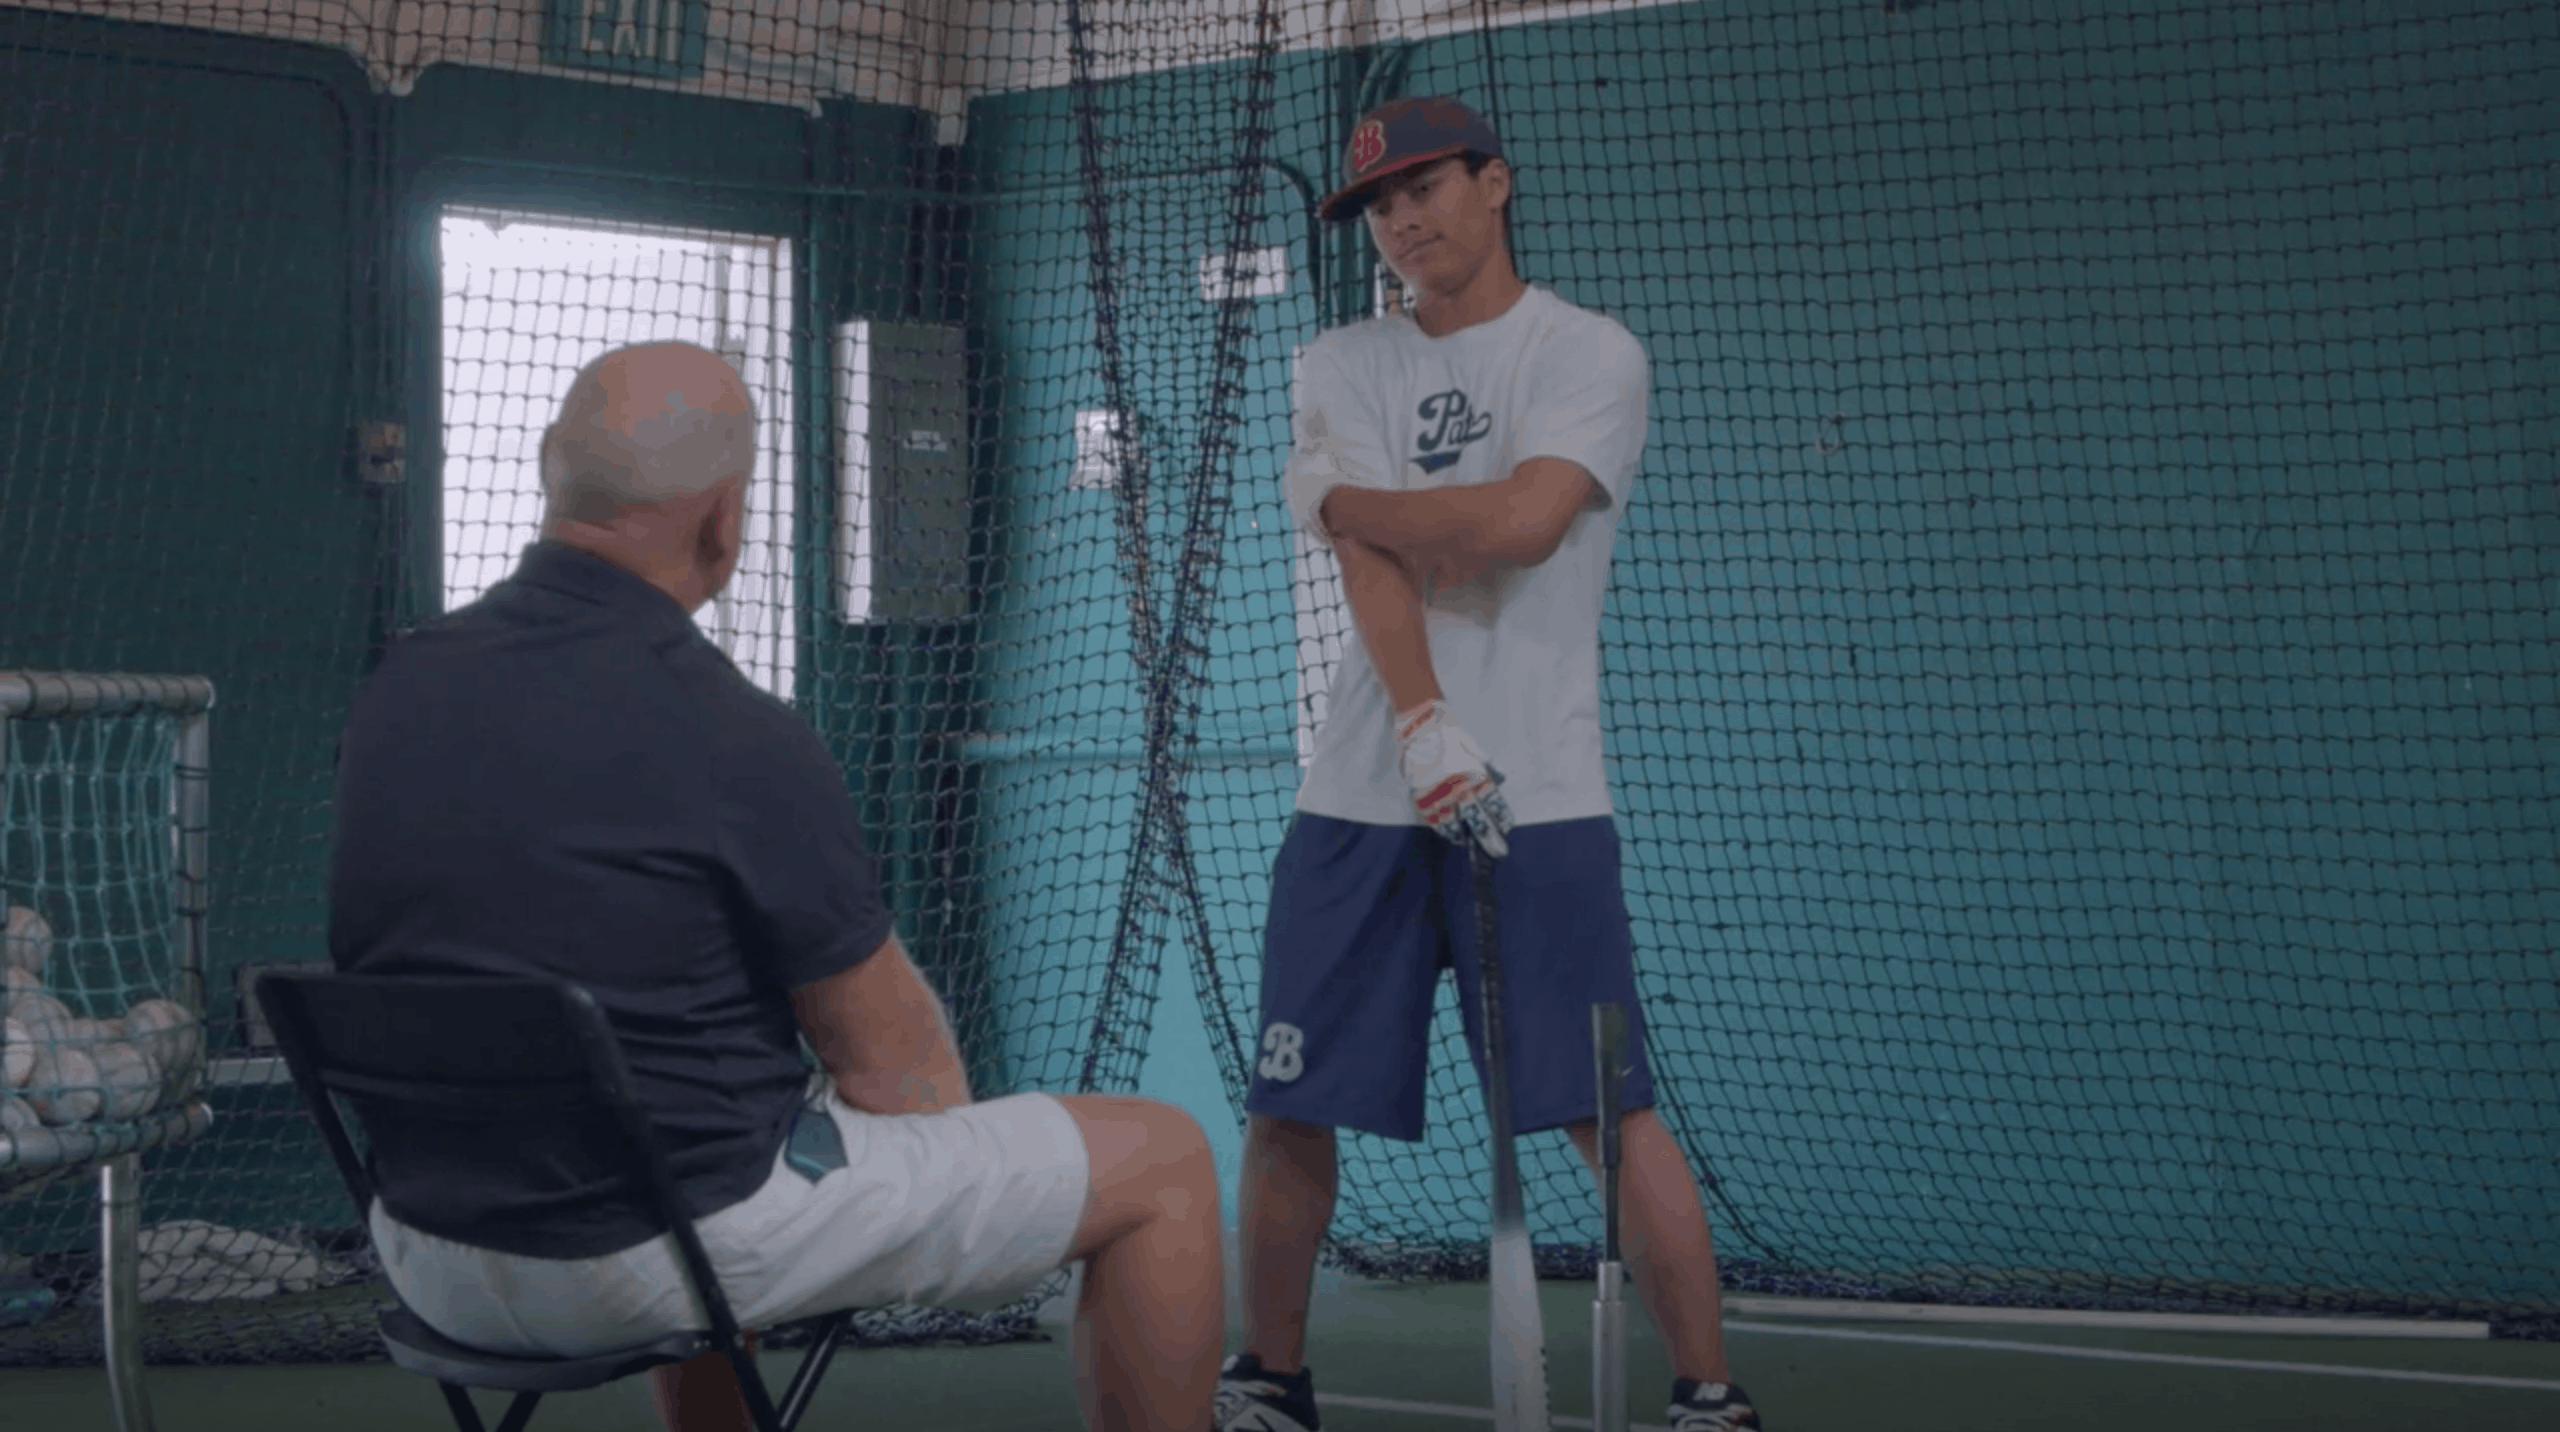 Dealing with negative emotions as a hitter.